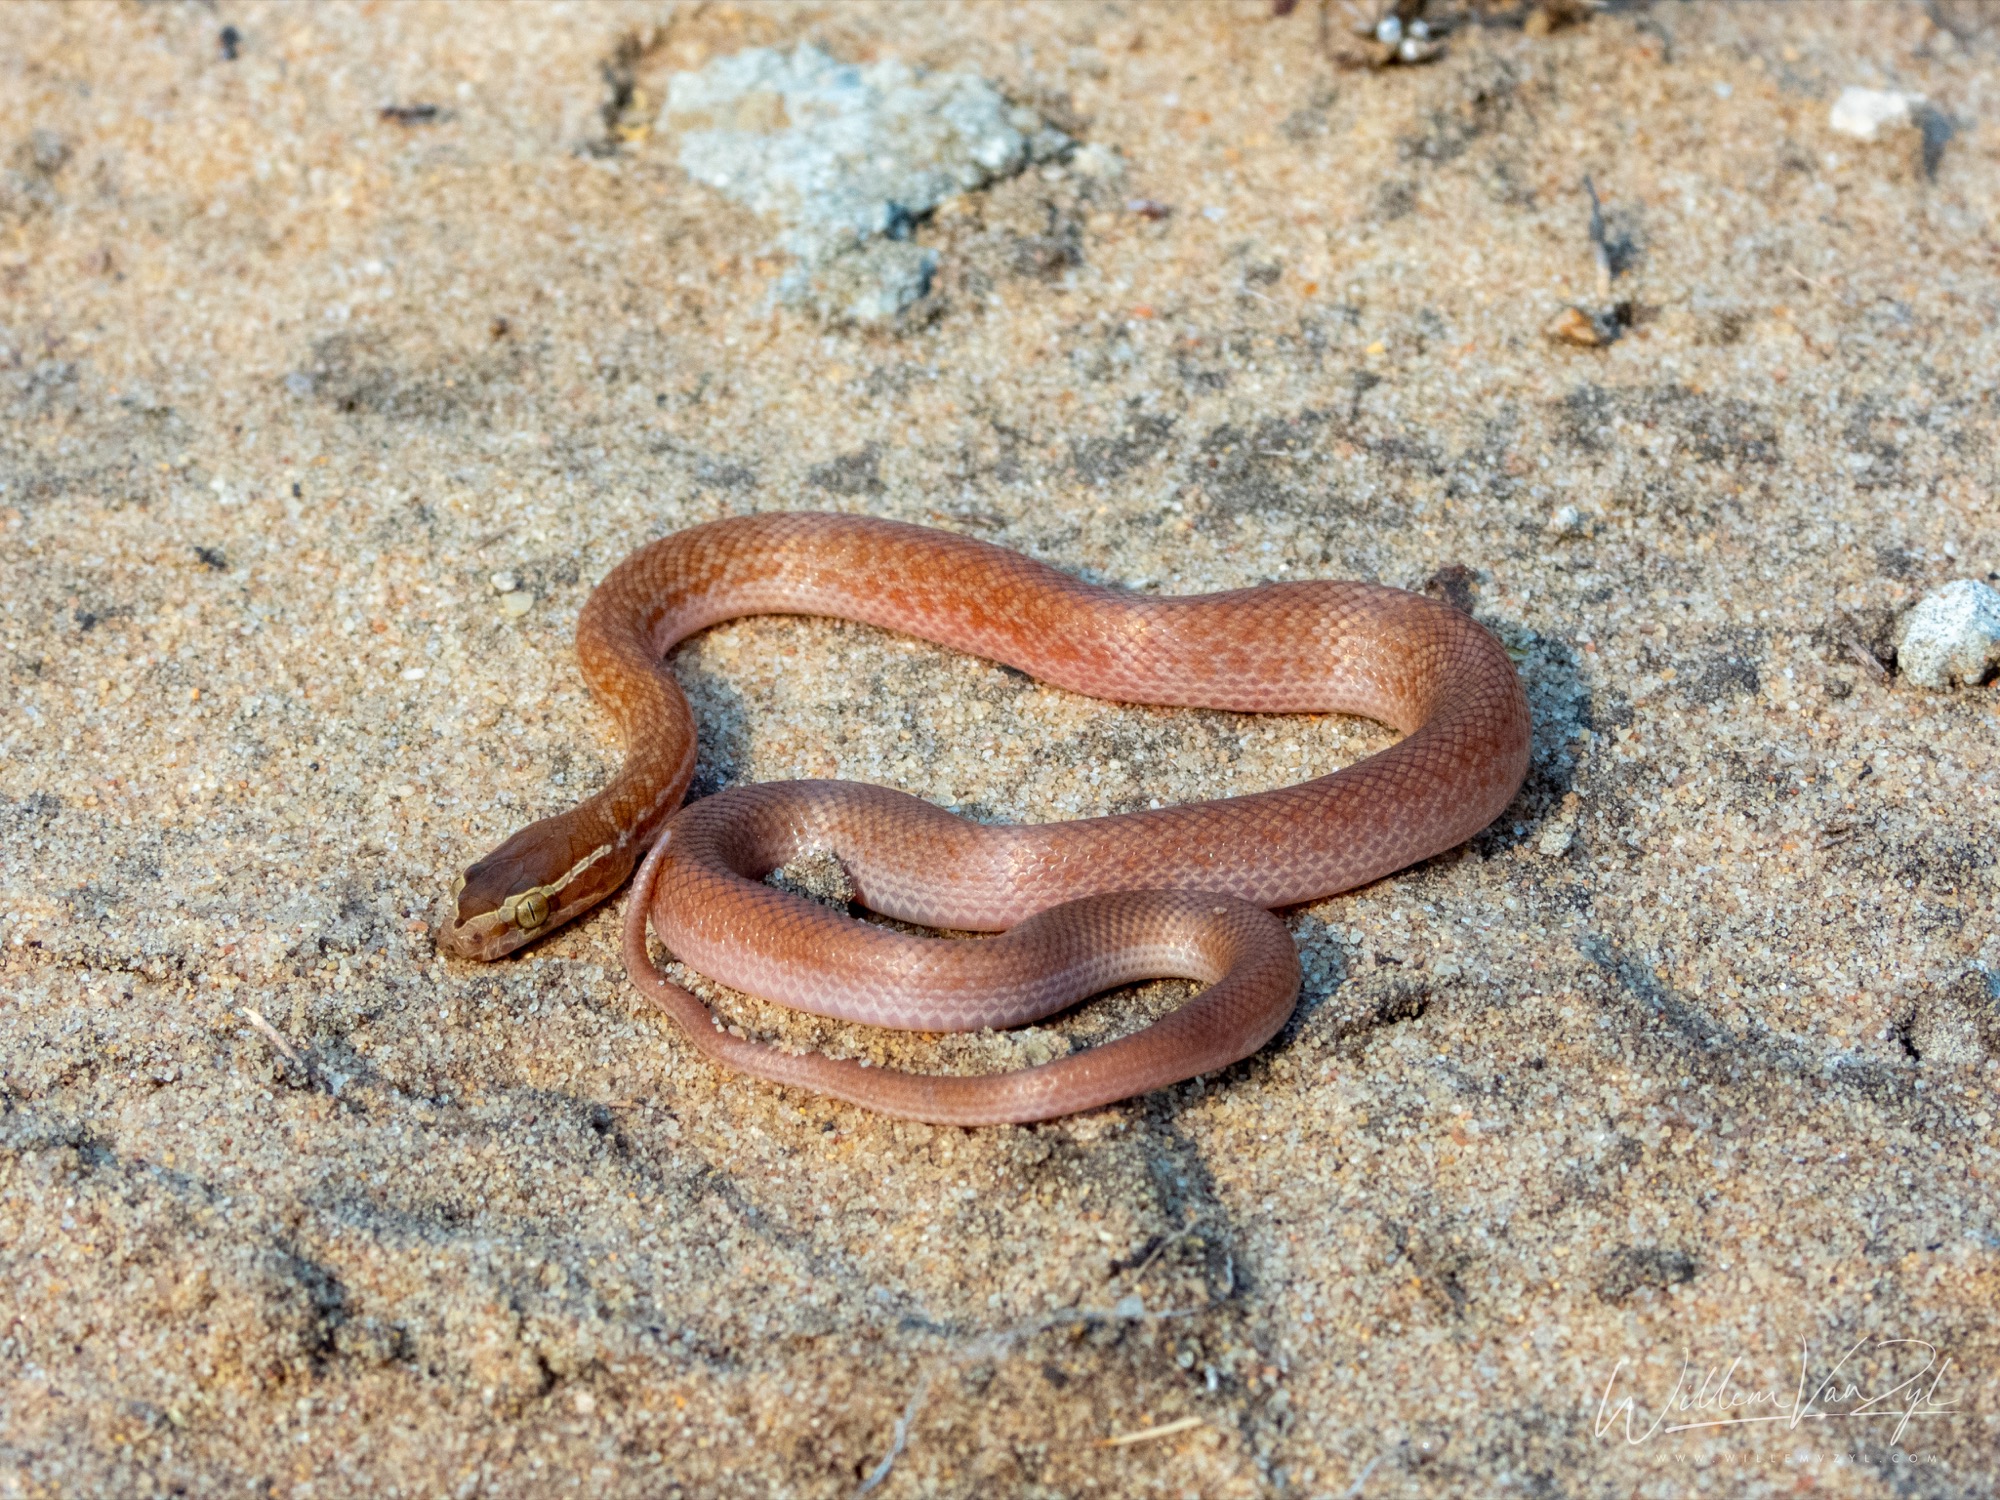 Brown House Snake (Boaedon capensis)